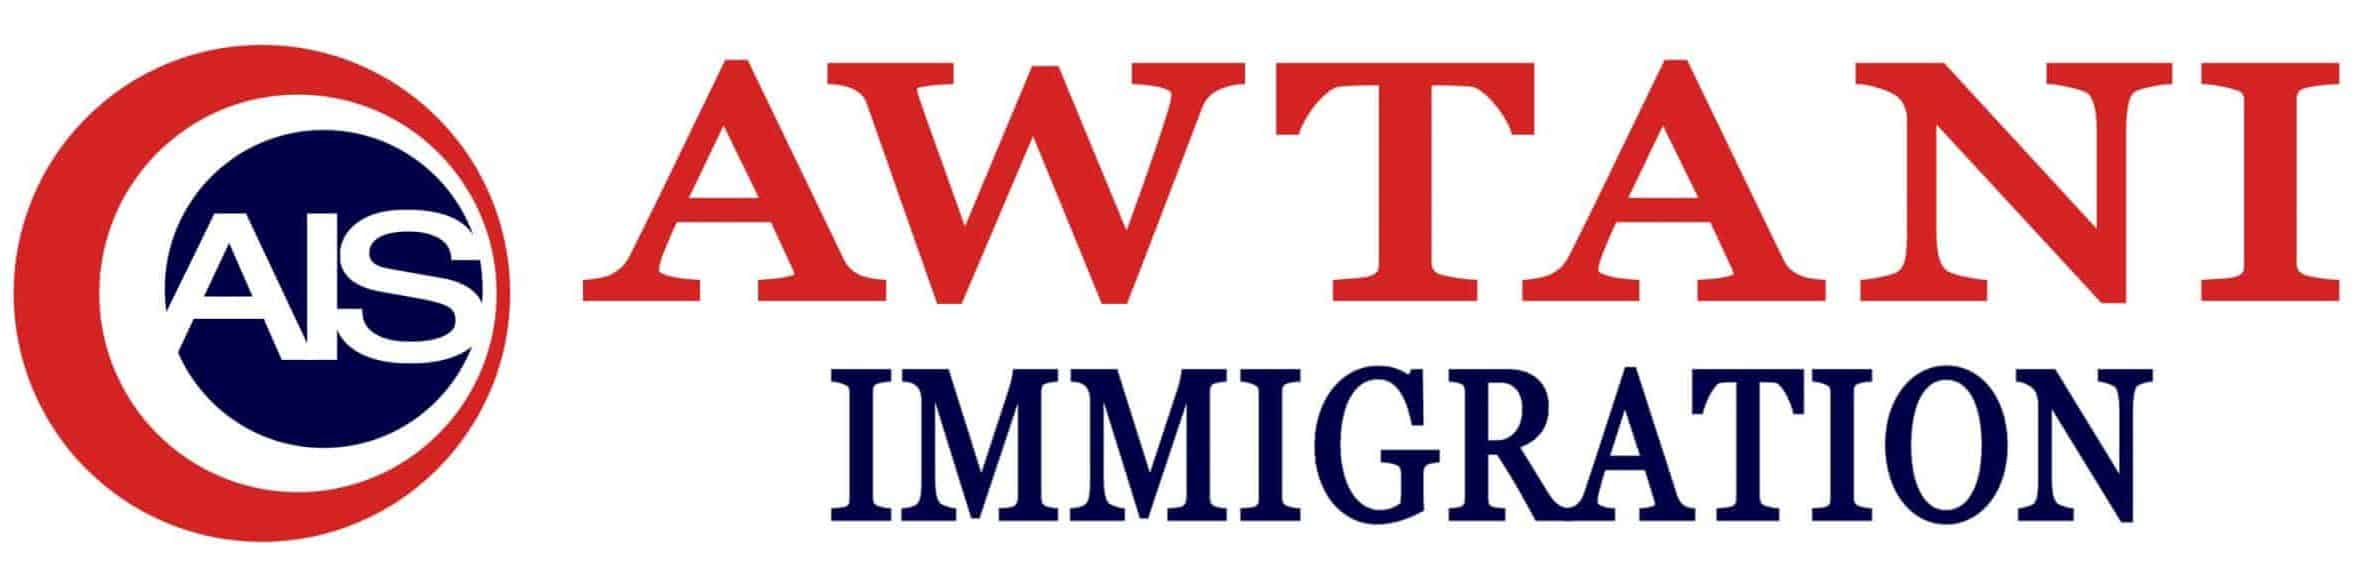 Awtani Immigration Solicitors